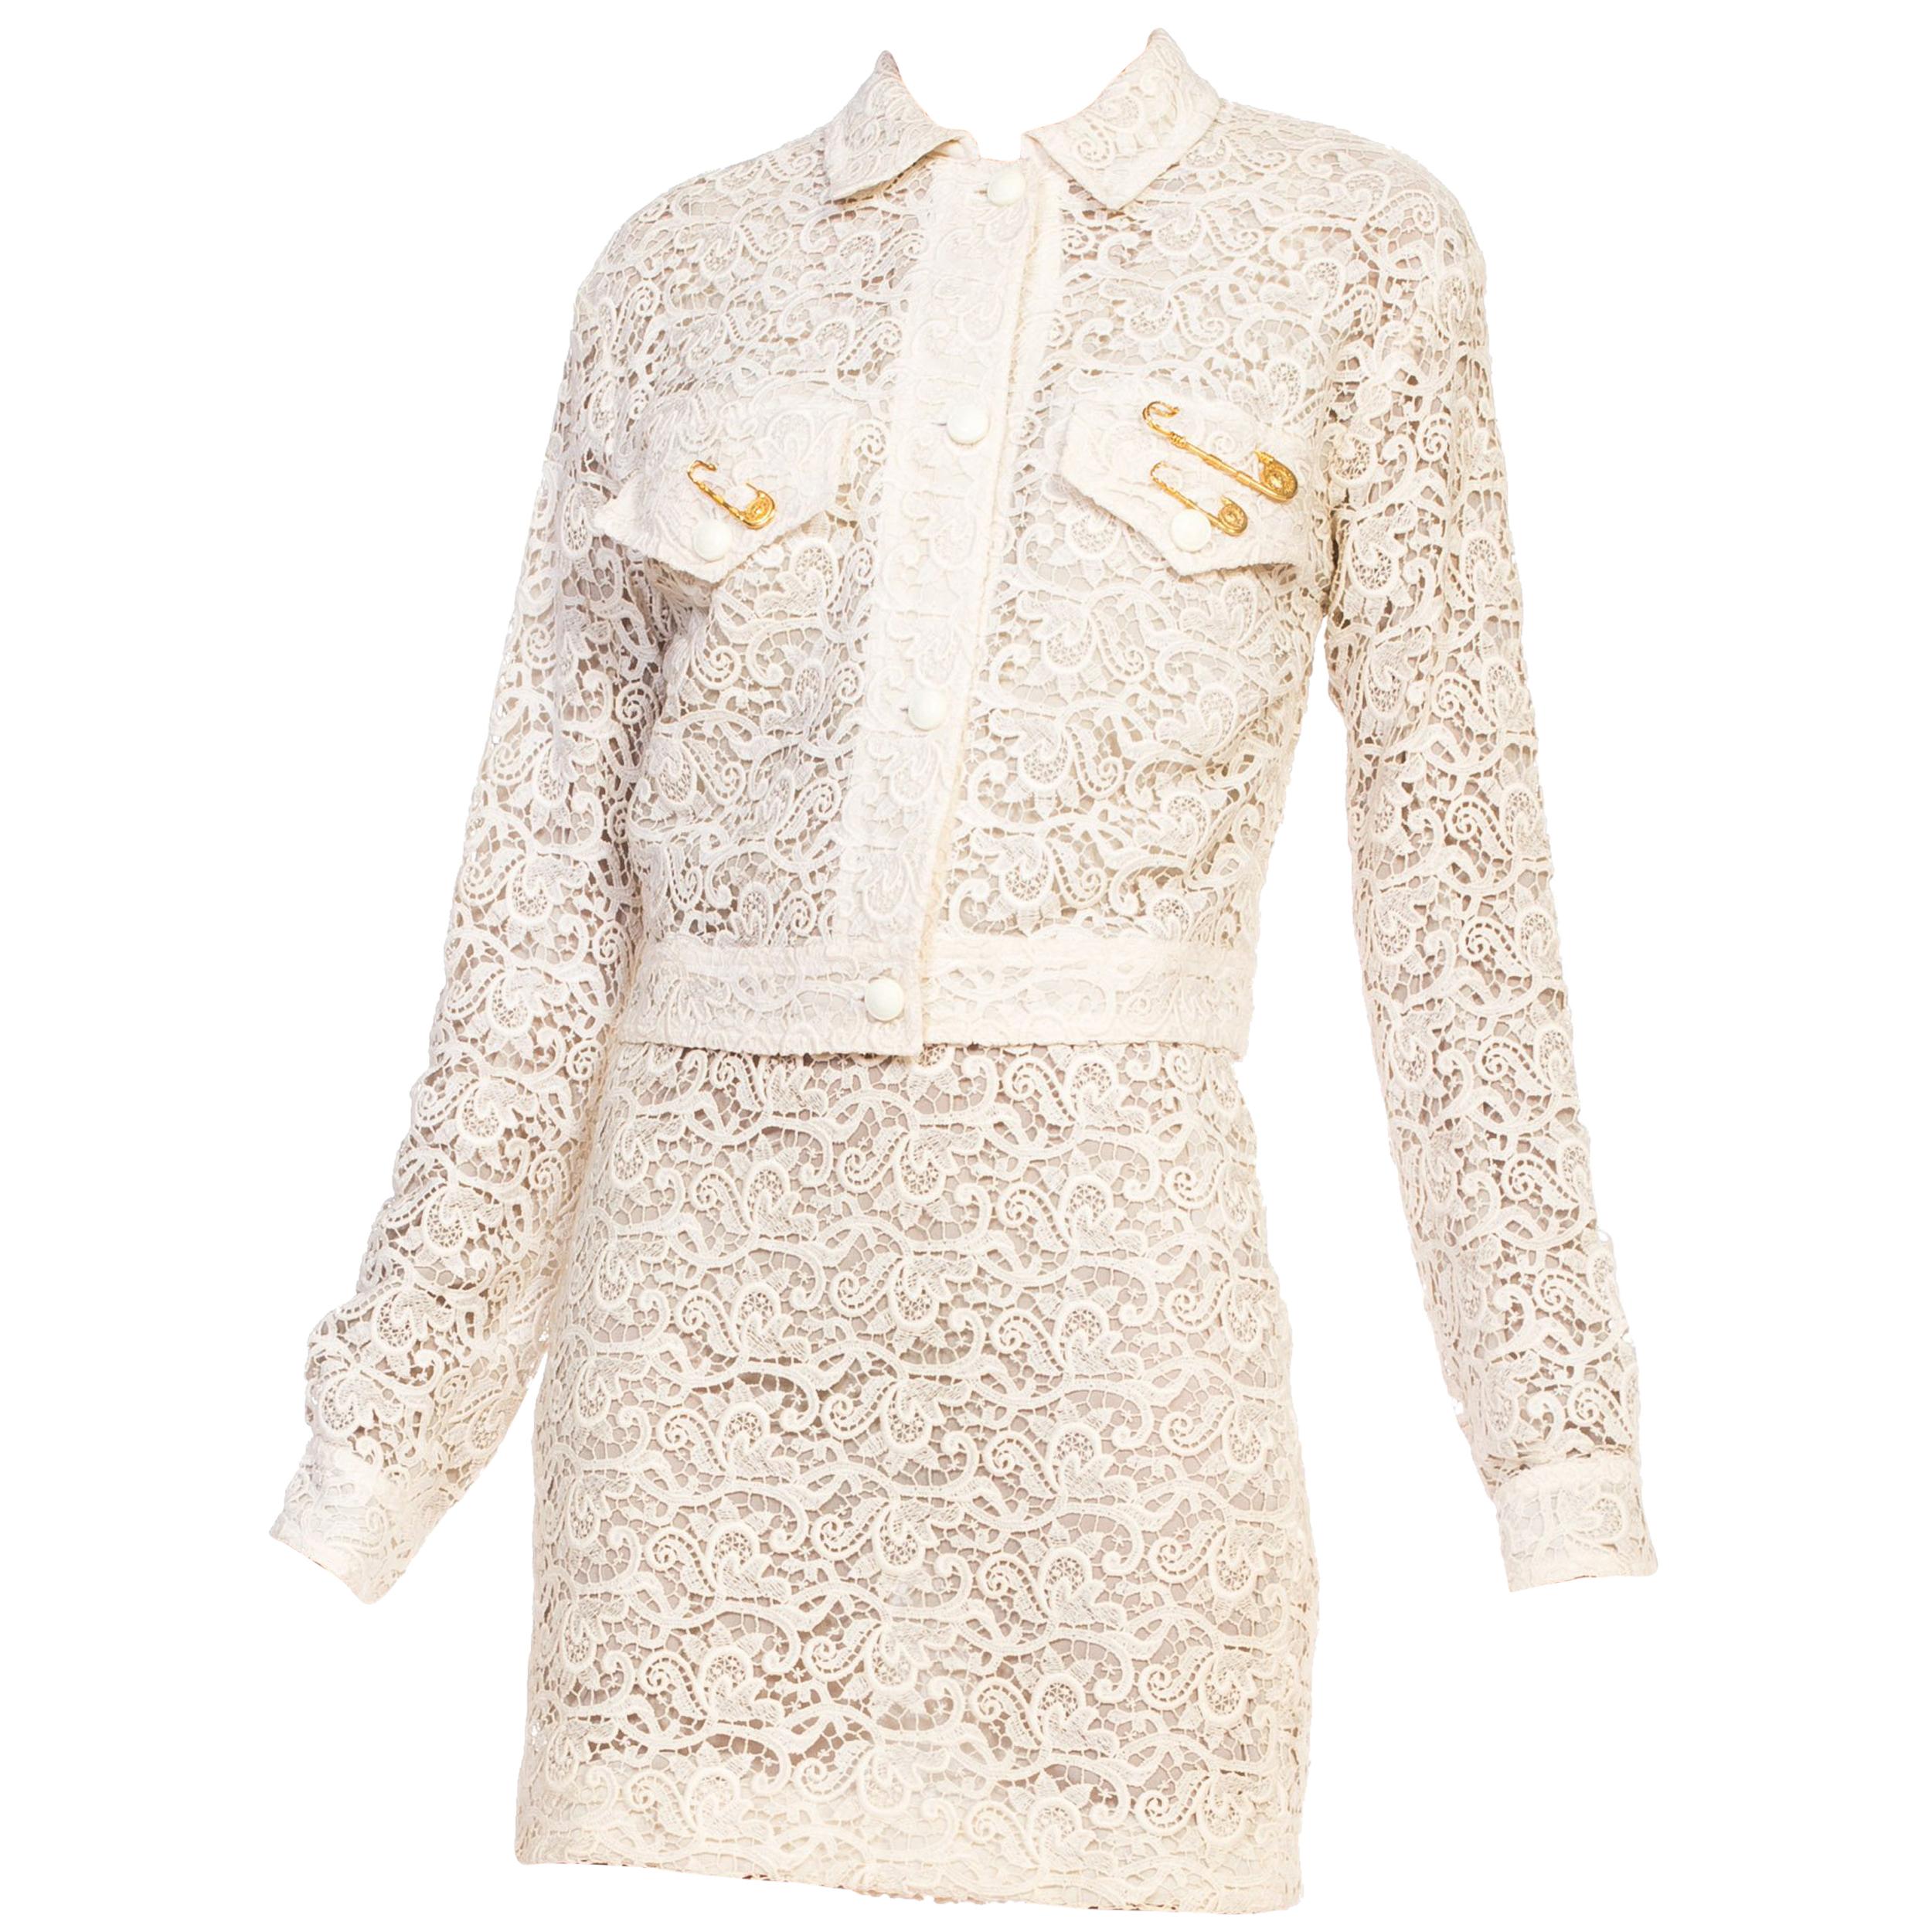 Sexy 1990s Gianni Versace Punk Safety Pin Collection Cream Lace Dress & Jacket